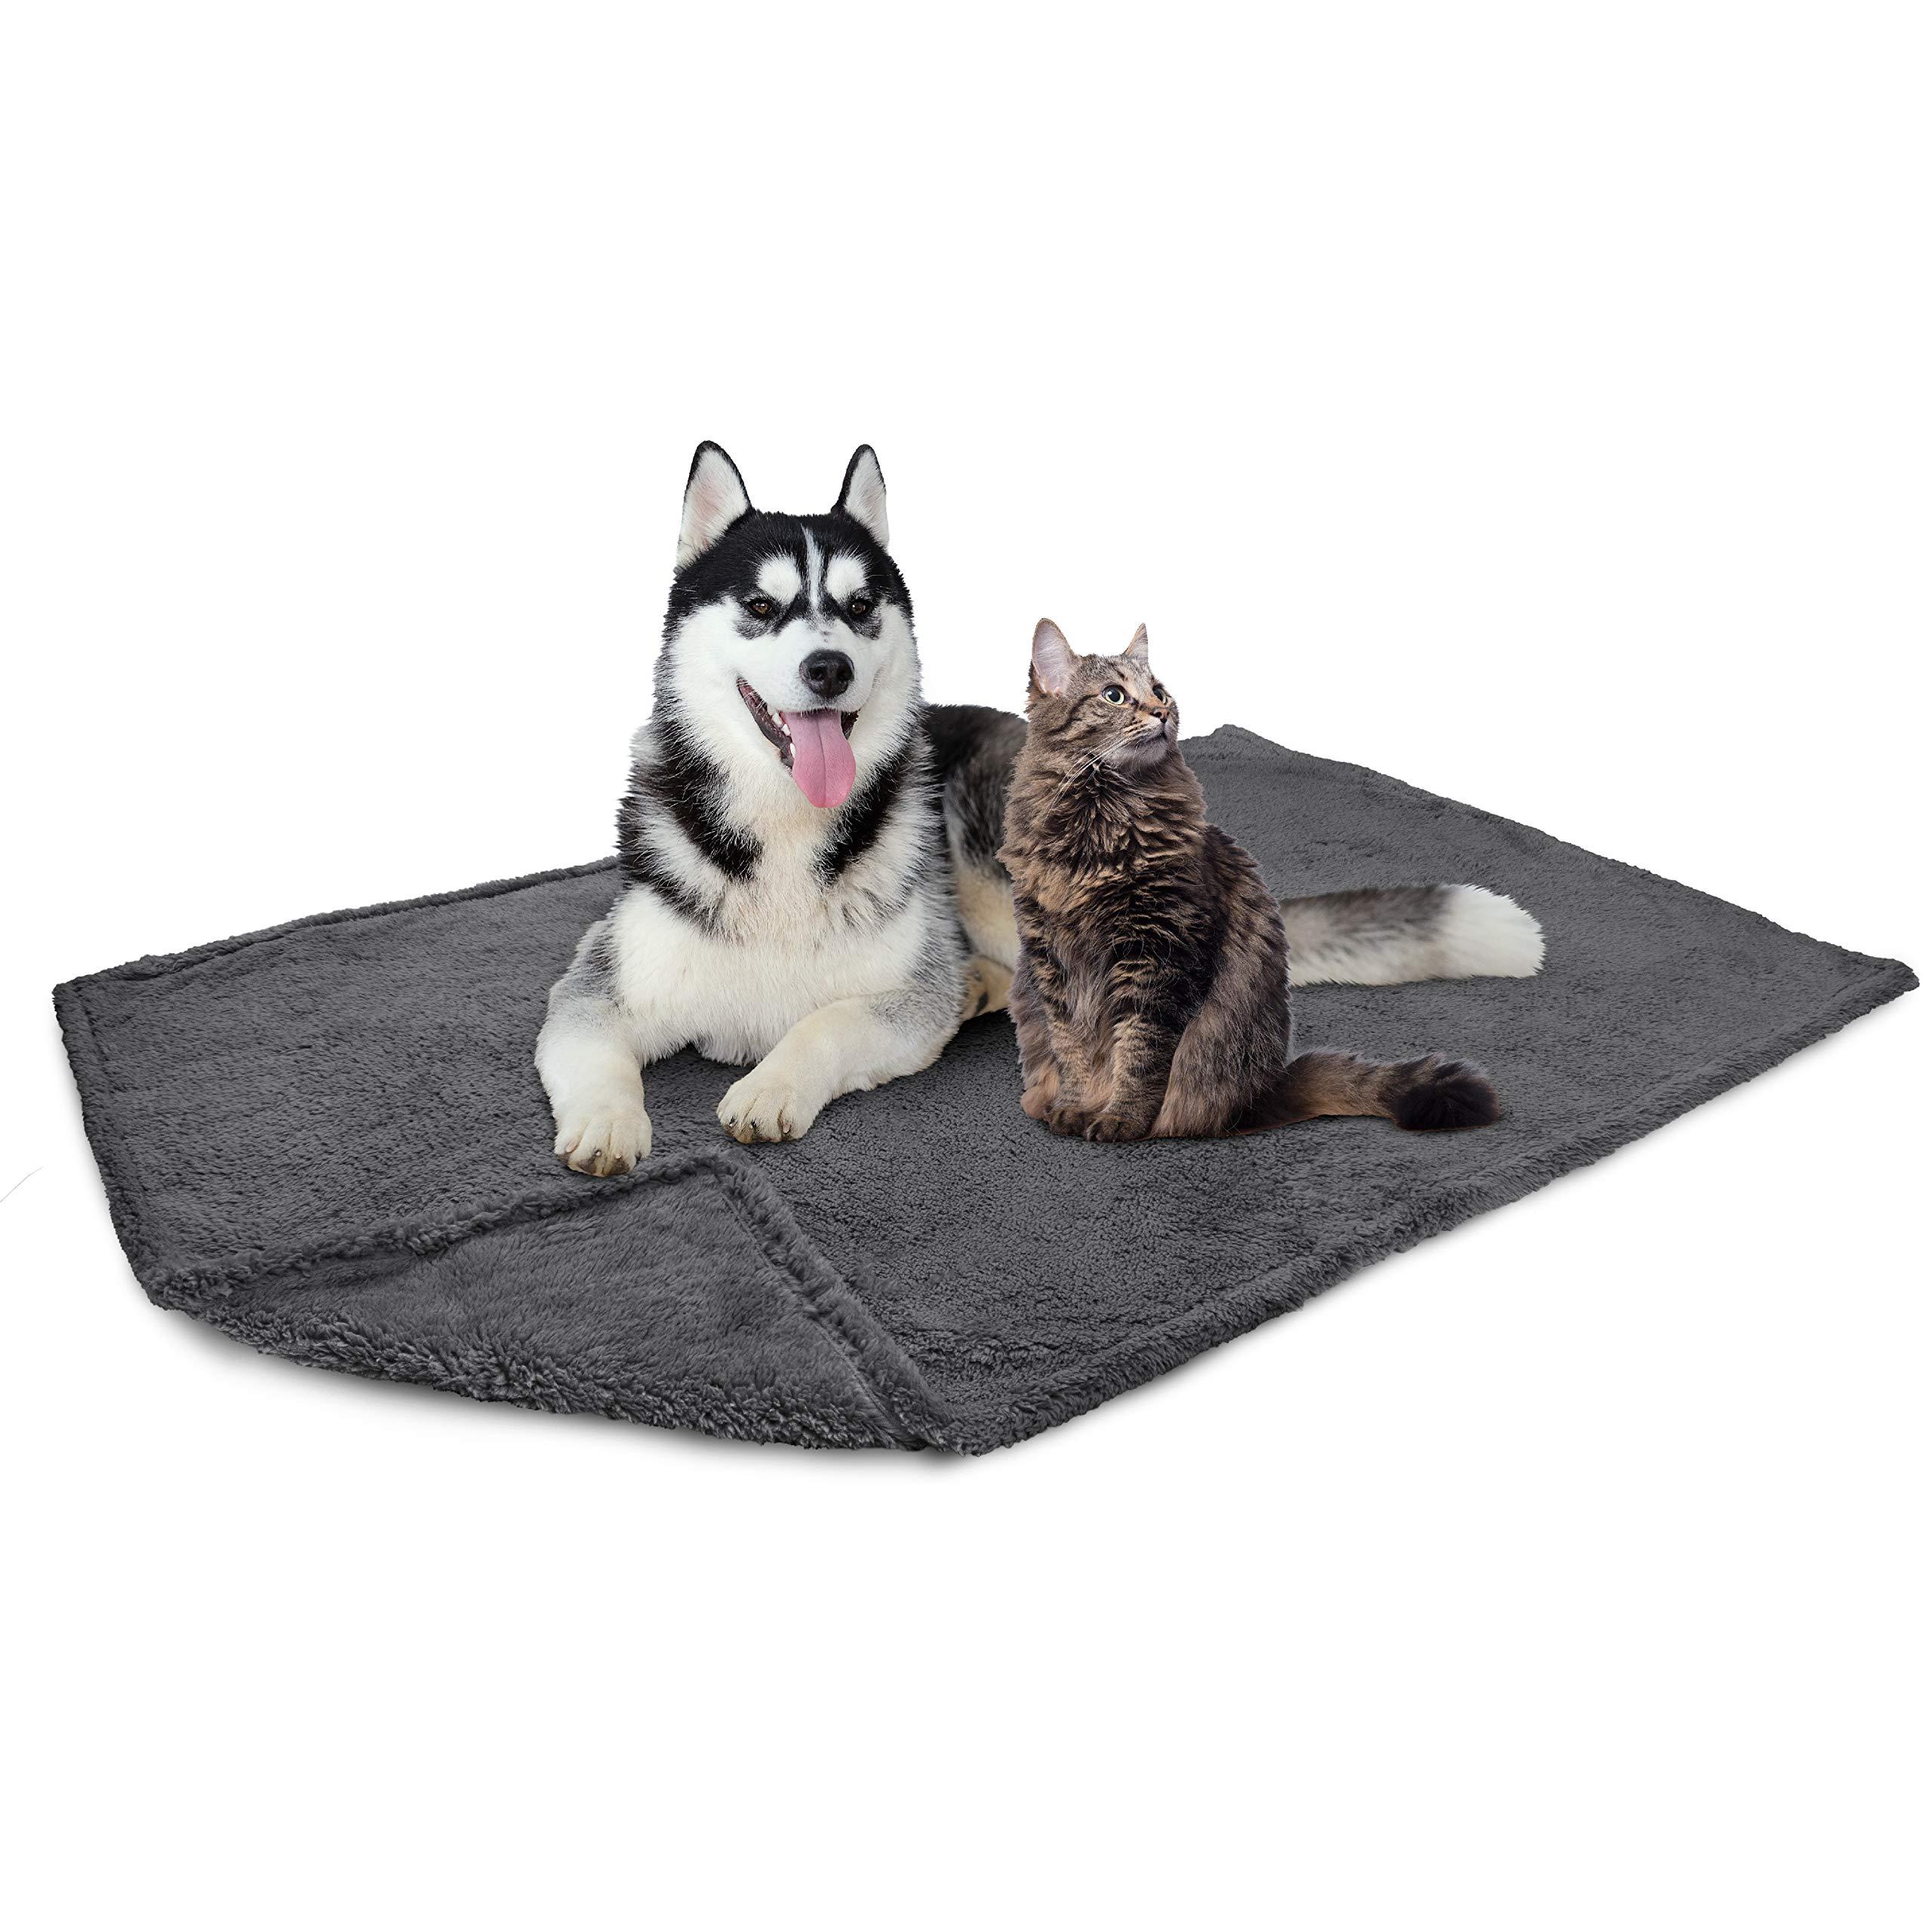 PetAmi Fluffy Waterproof Dog Blanket Fleece | Soft Warm Pet Fleece Throw for Medium Dogs and Cats | Fuzzy Furry Plush Sherpa Throw Furniture Protector Sofa Couch Bed (Gray, 29x40)